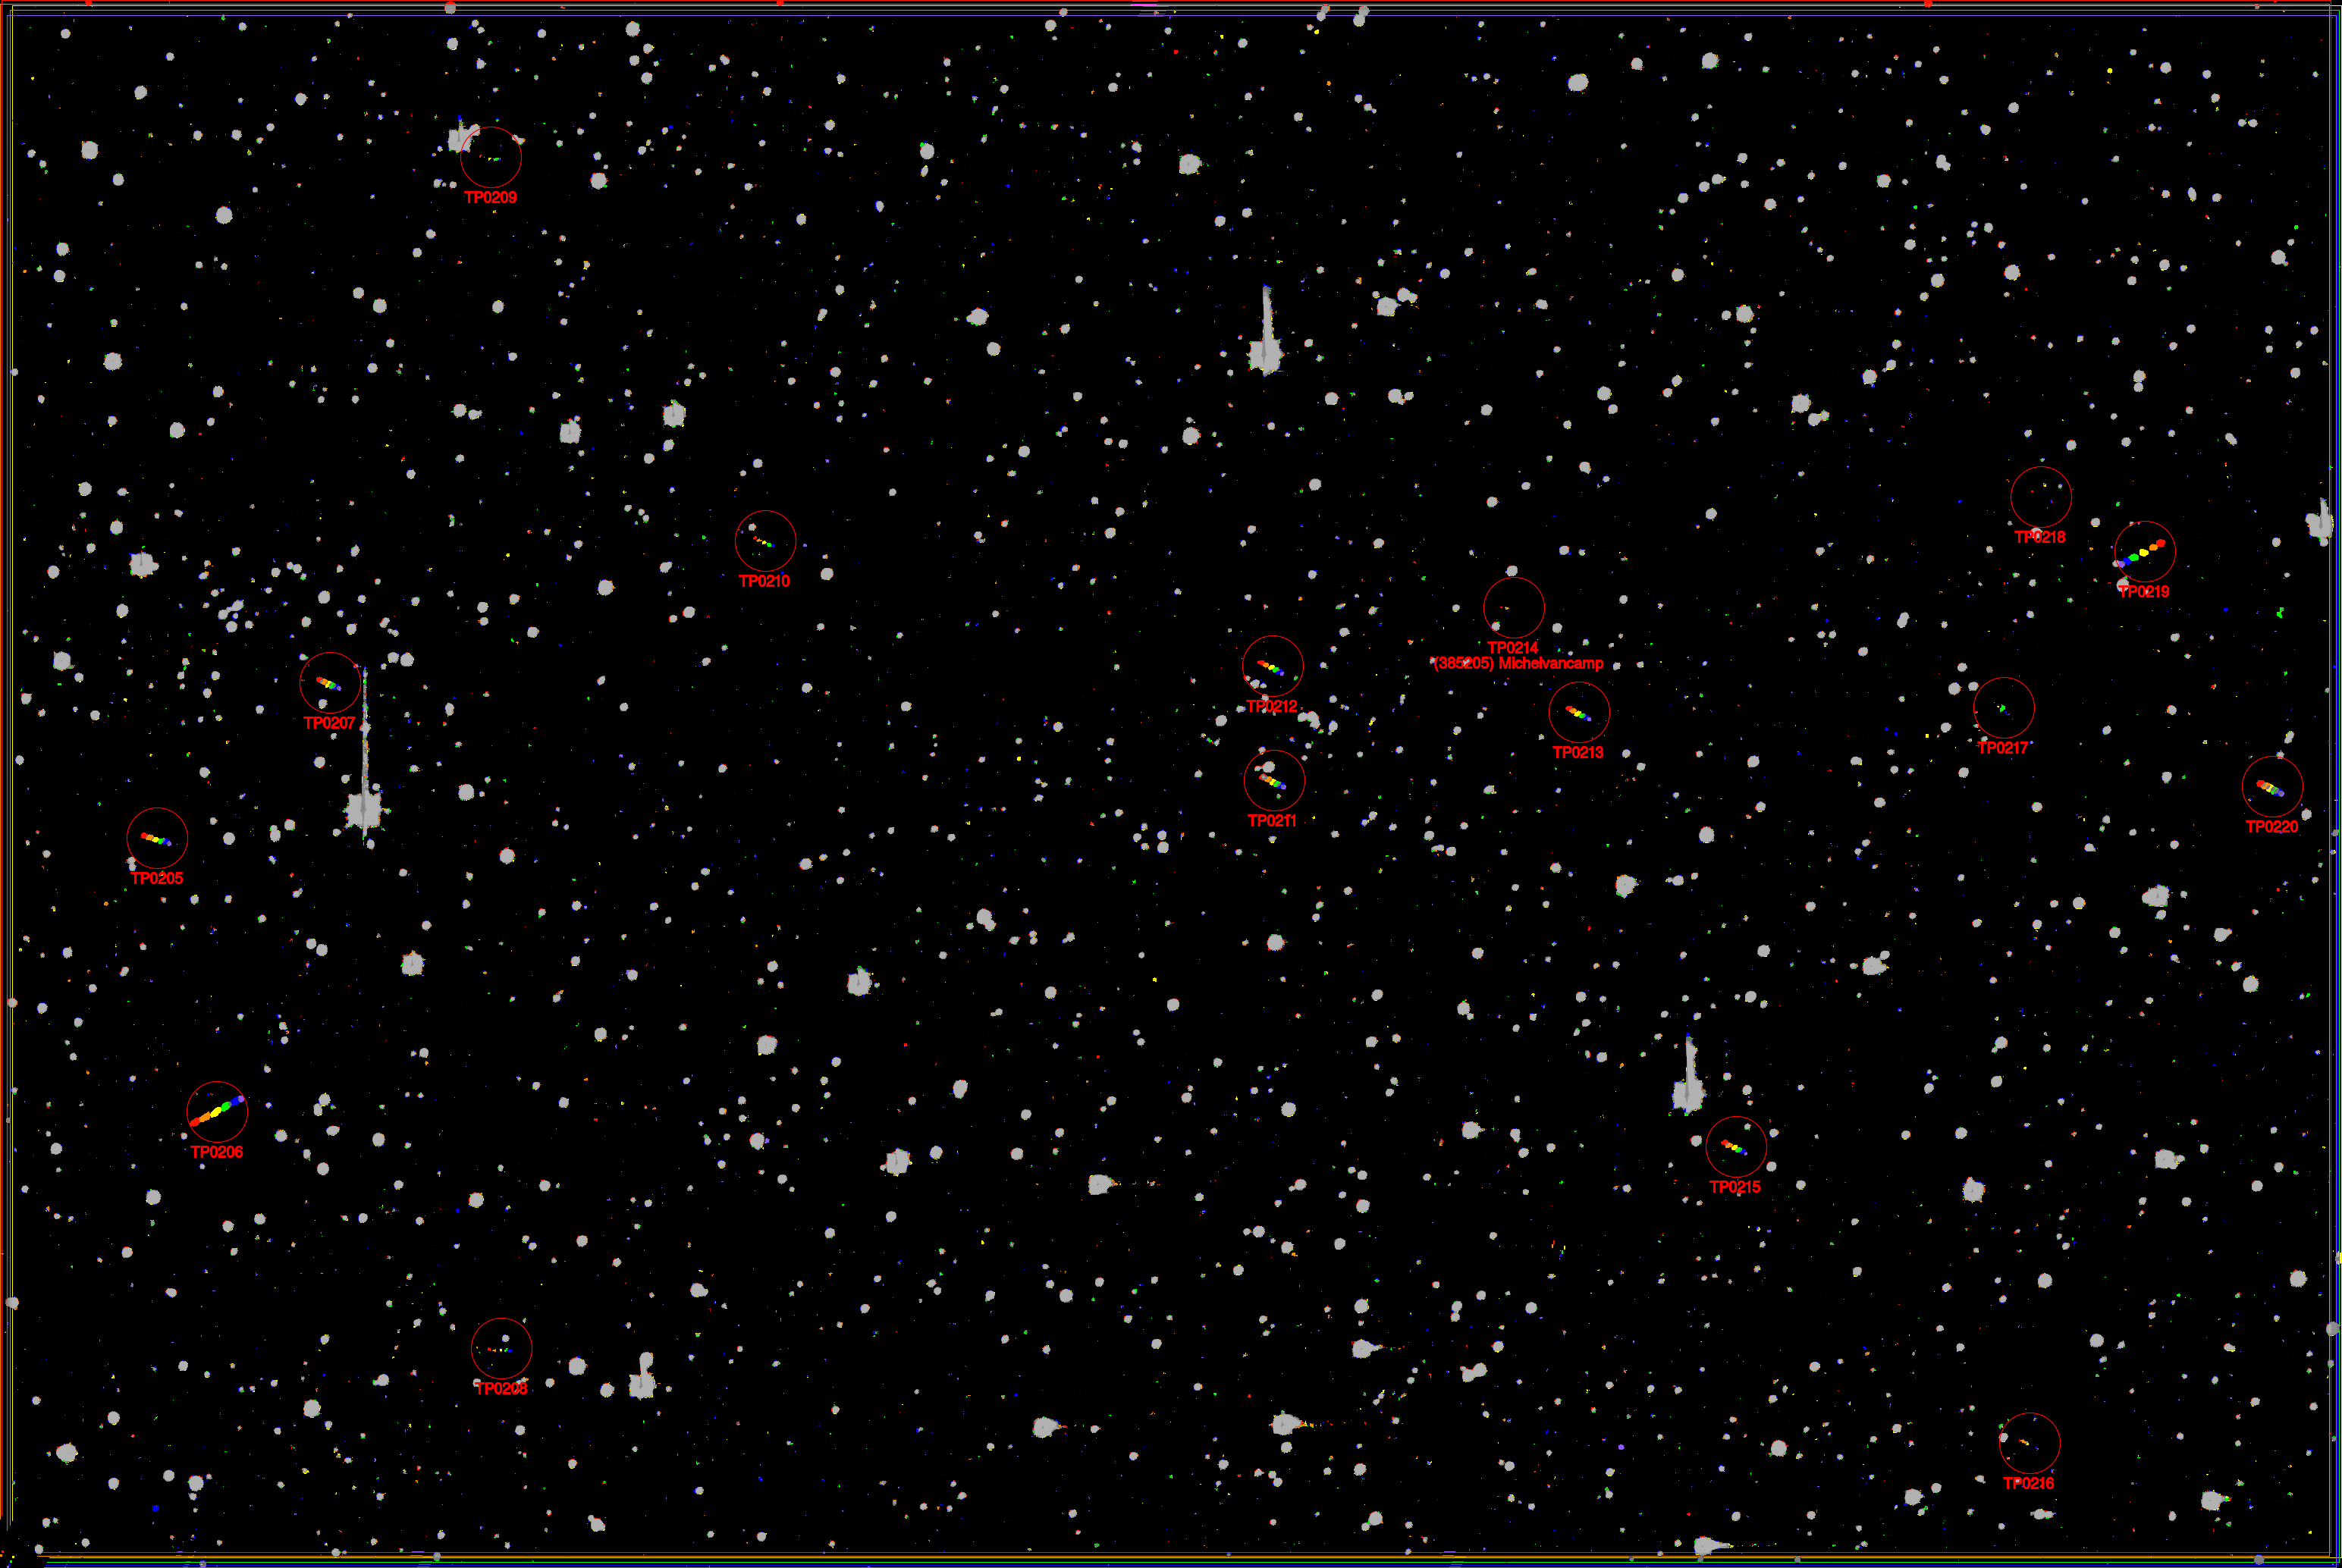 Figure 6: Compilation of six consecutive CCD images taken in Uccle by Thierry Pauwels during the night of 20 to 21 September 1999. The image shows 16 asteroids, which is the largest number ever observed in a single field of view of the CCD camera on the Uccle Schmidt telescope. Of those 16 asteroids, 6 to 8 were discovered at Uccle. The asteroid (385205) Michelvancamp is annotated here as ’TP0214’. Asteroids appear as a beaded string in rainbow colours, while stars appear as grey dots and image noise as single-coloured dots.